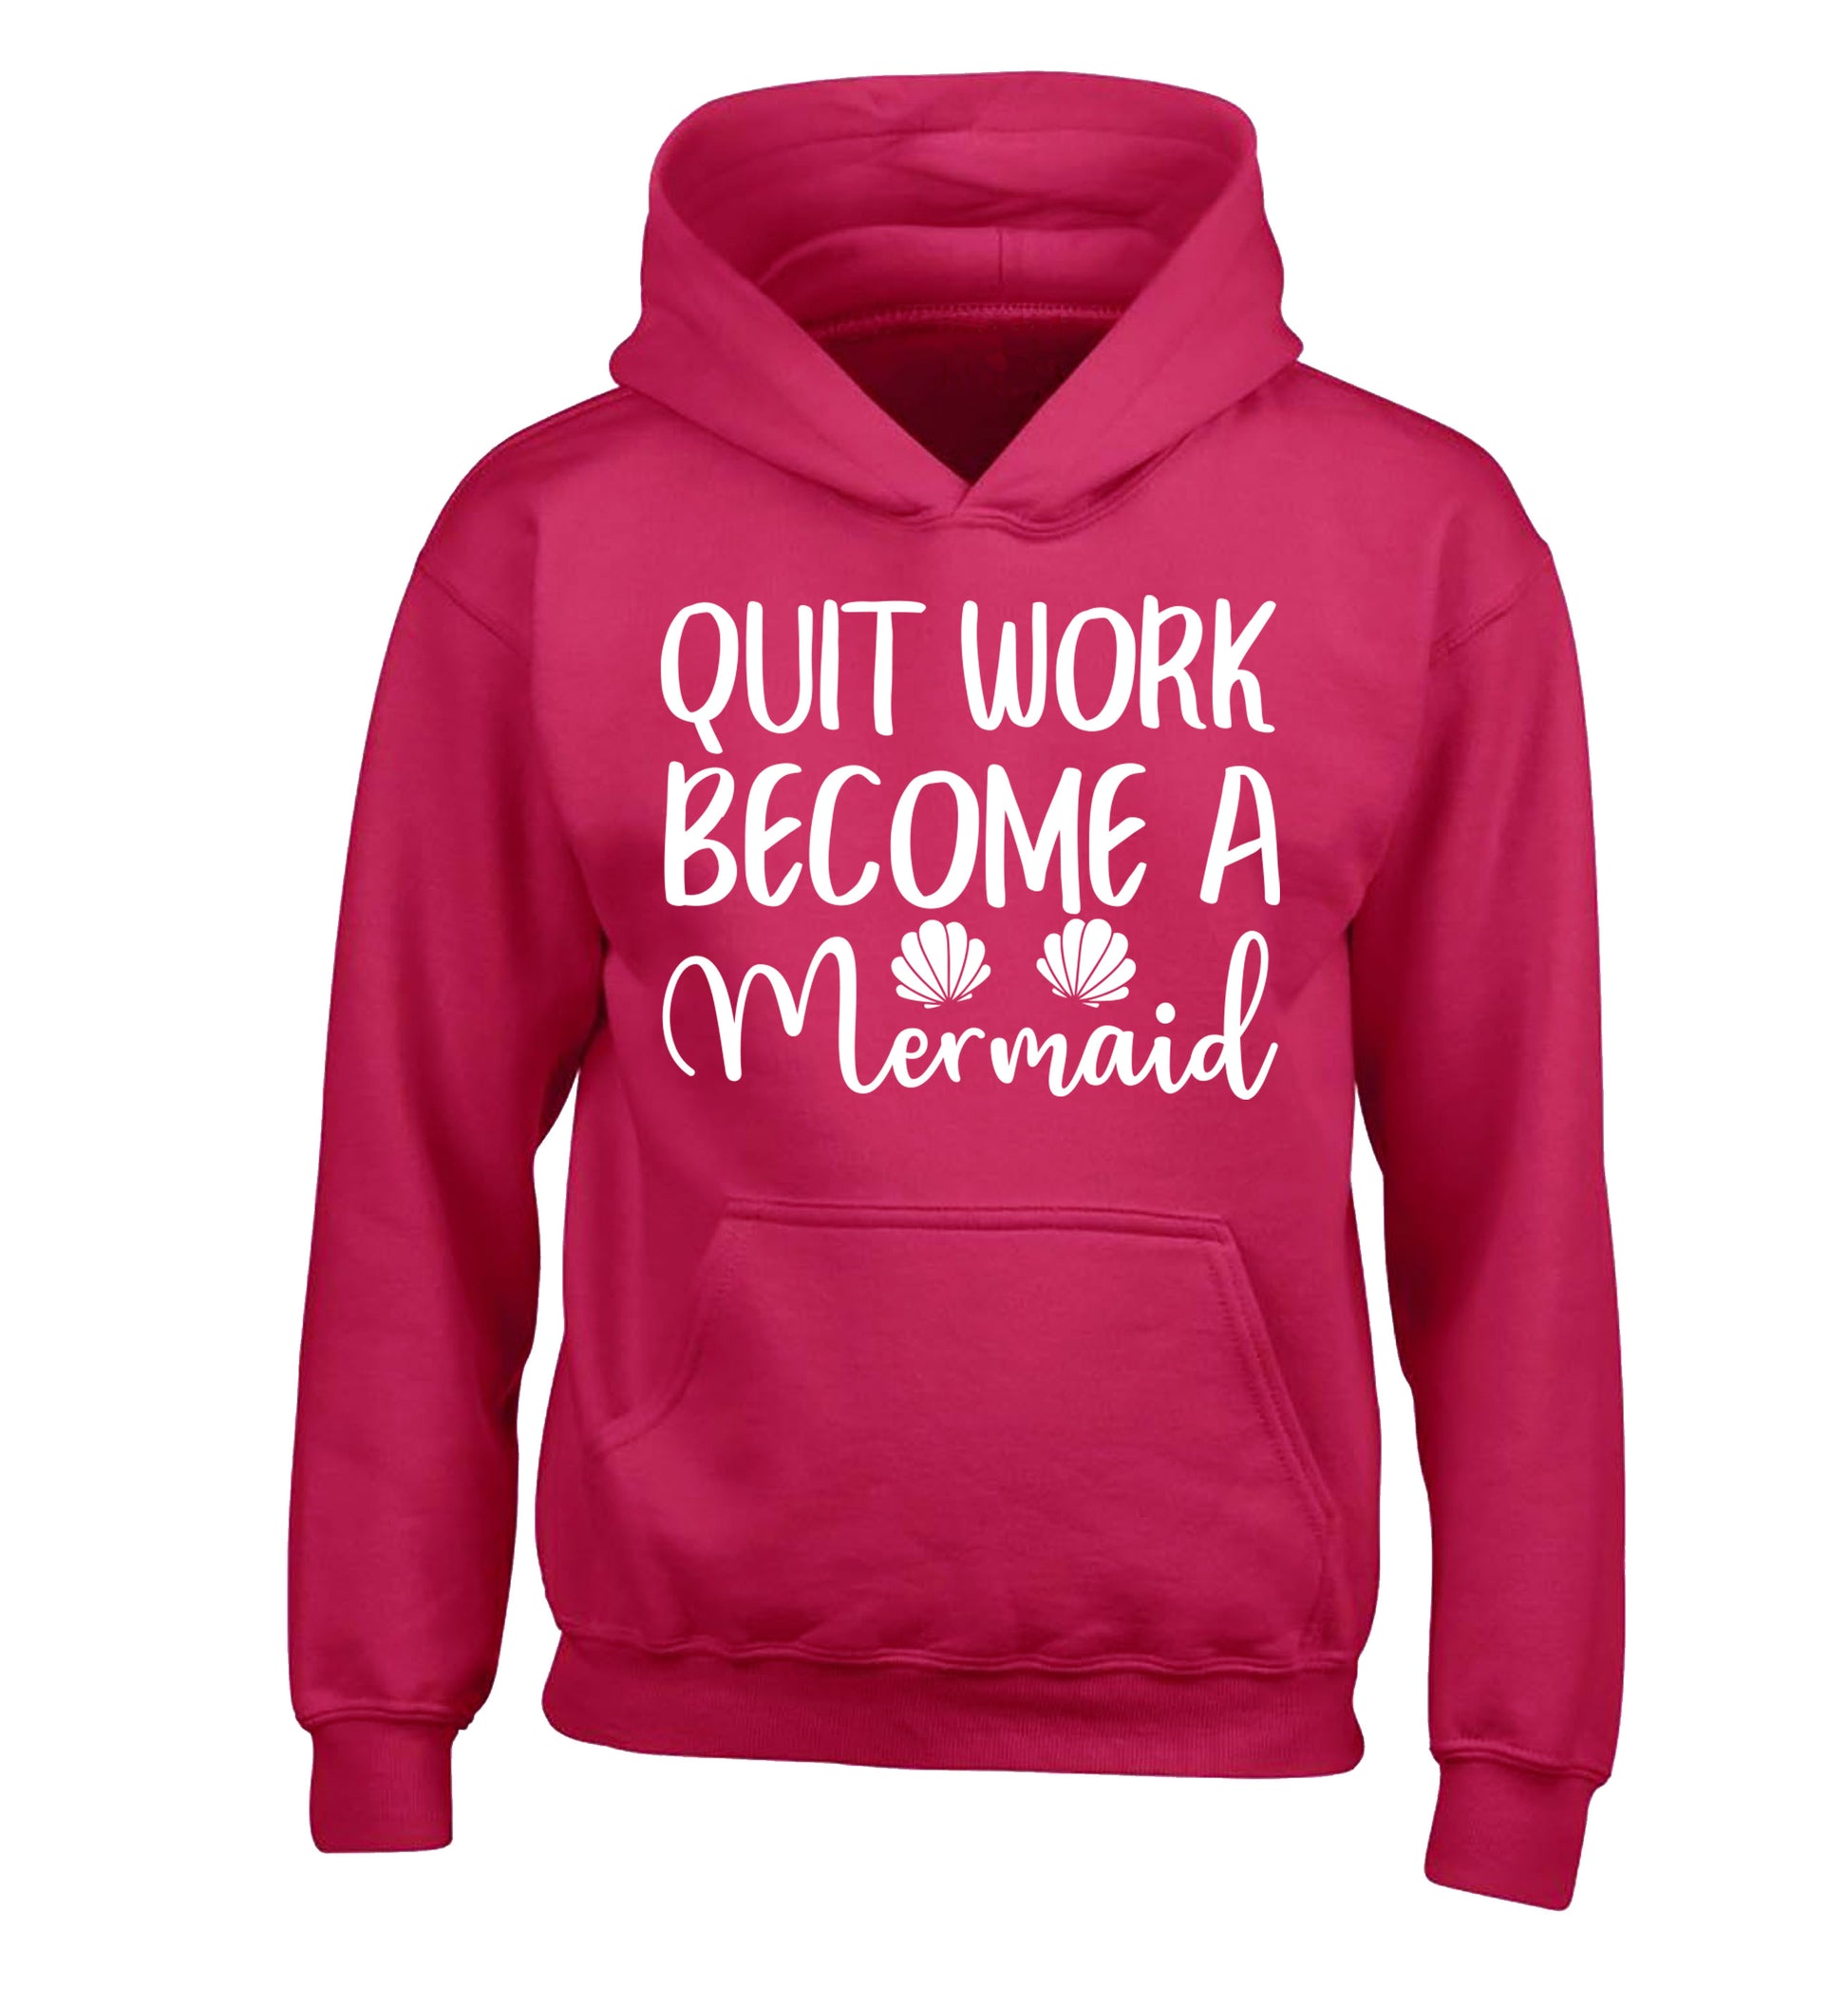 Quit work become a mermaid children's pink hoodie 12-13 Years